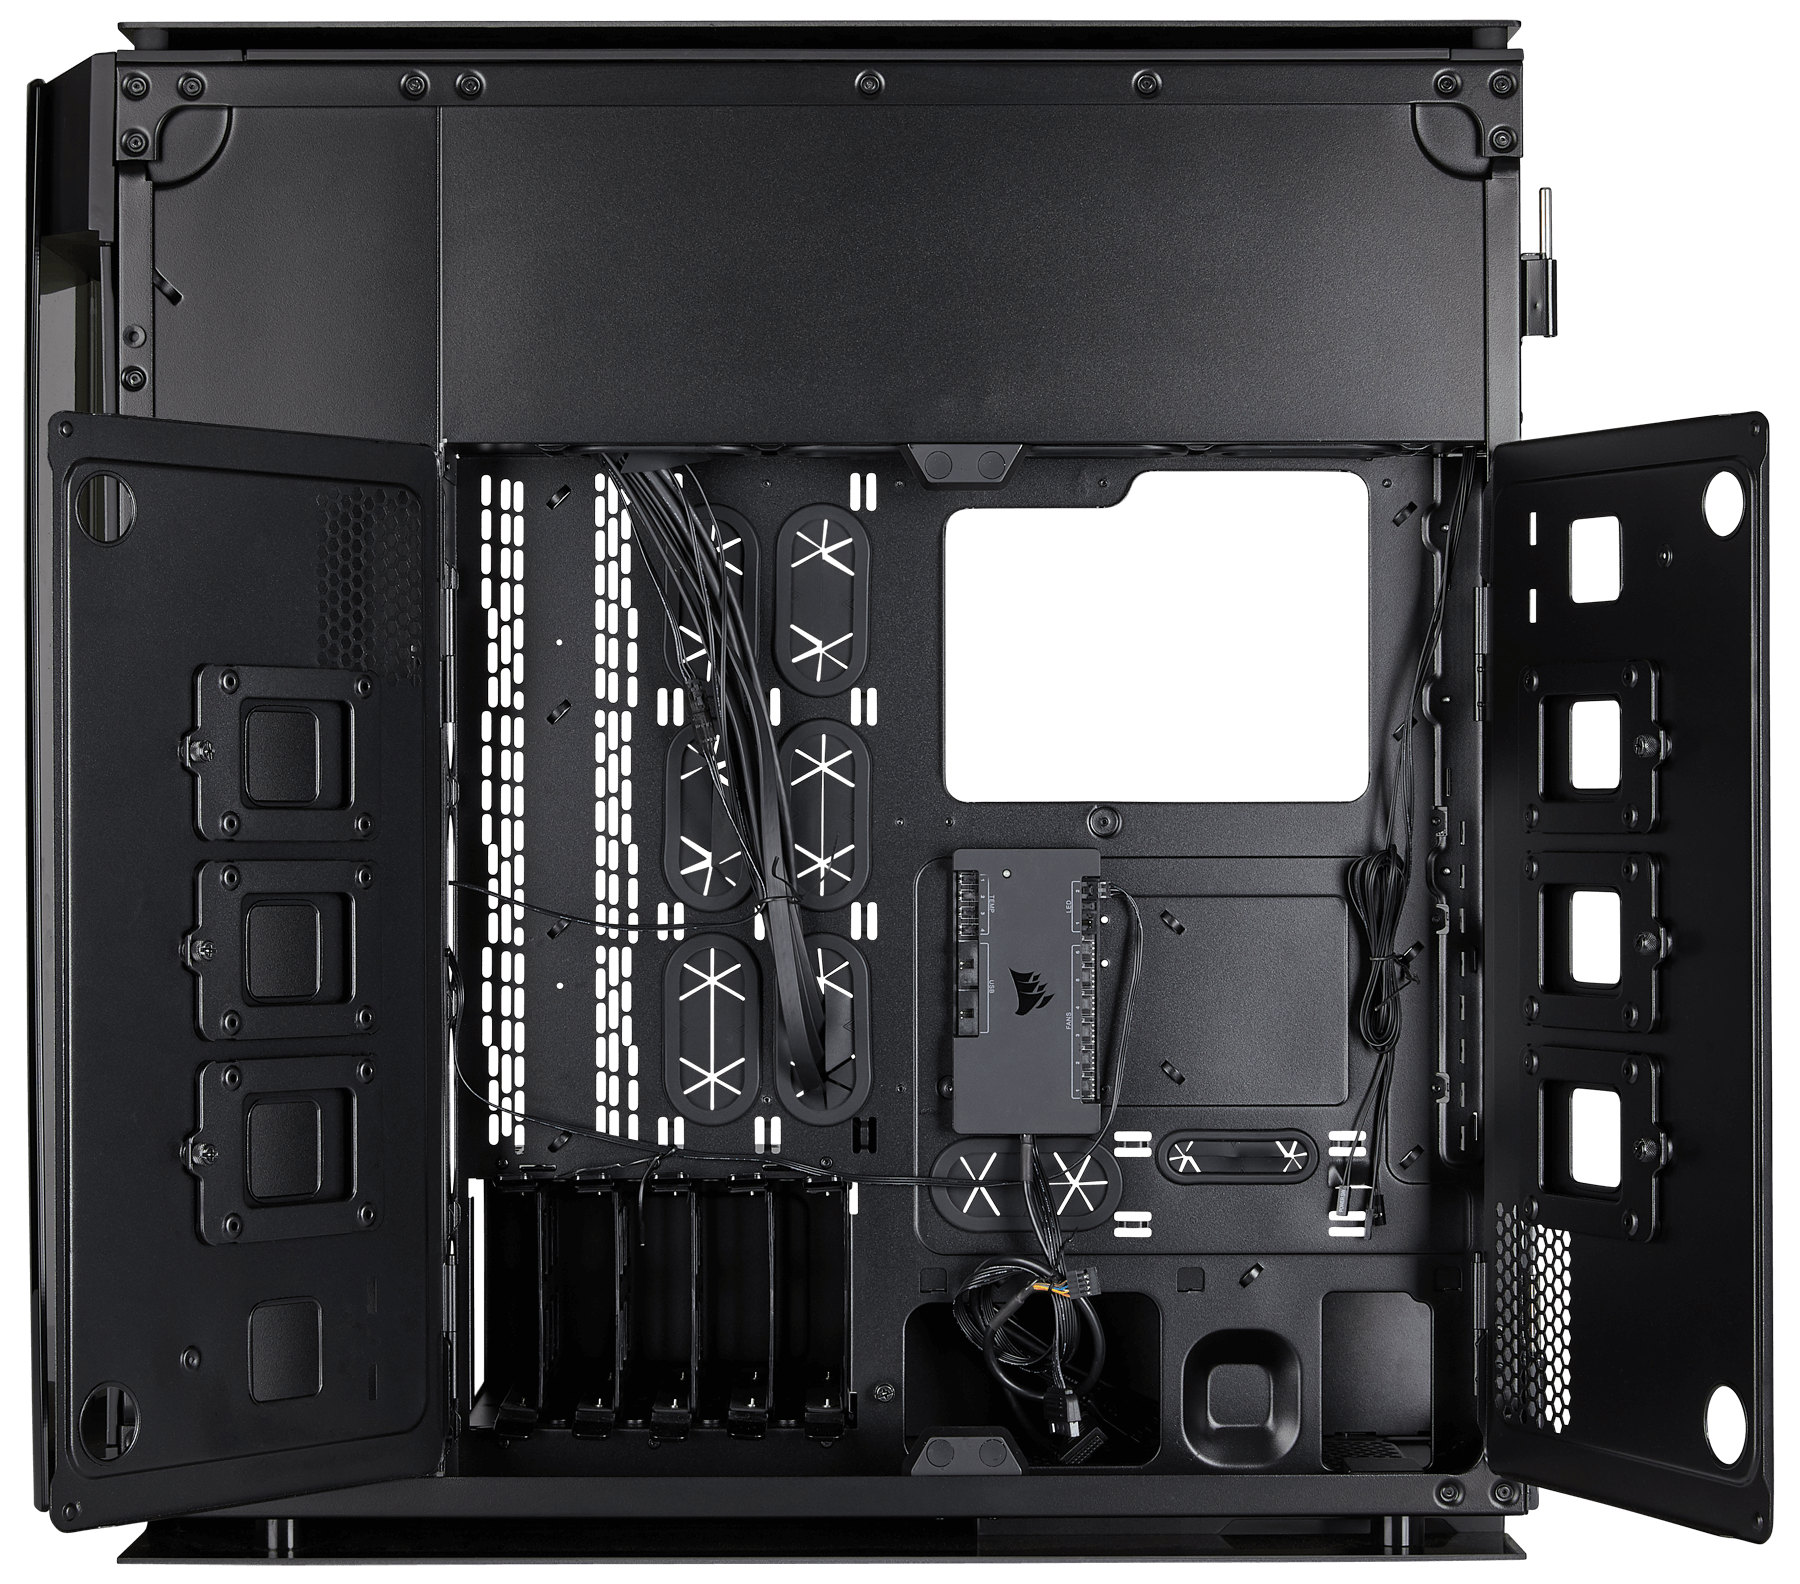 kerne fred fjer Corsair Obsidian 1000D Leaked to Amazon | TechPowerUp